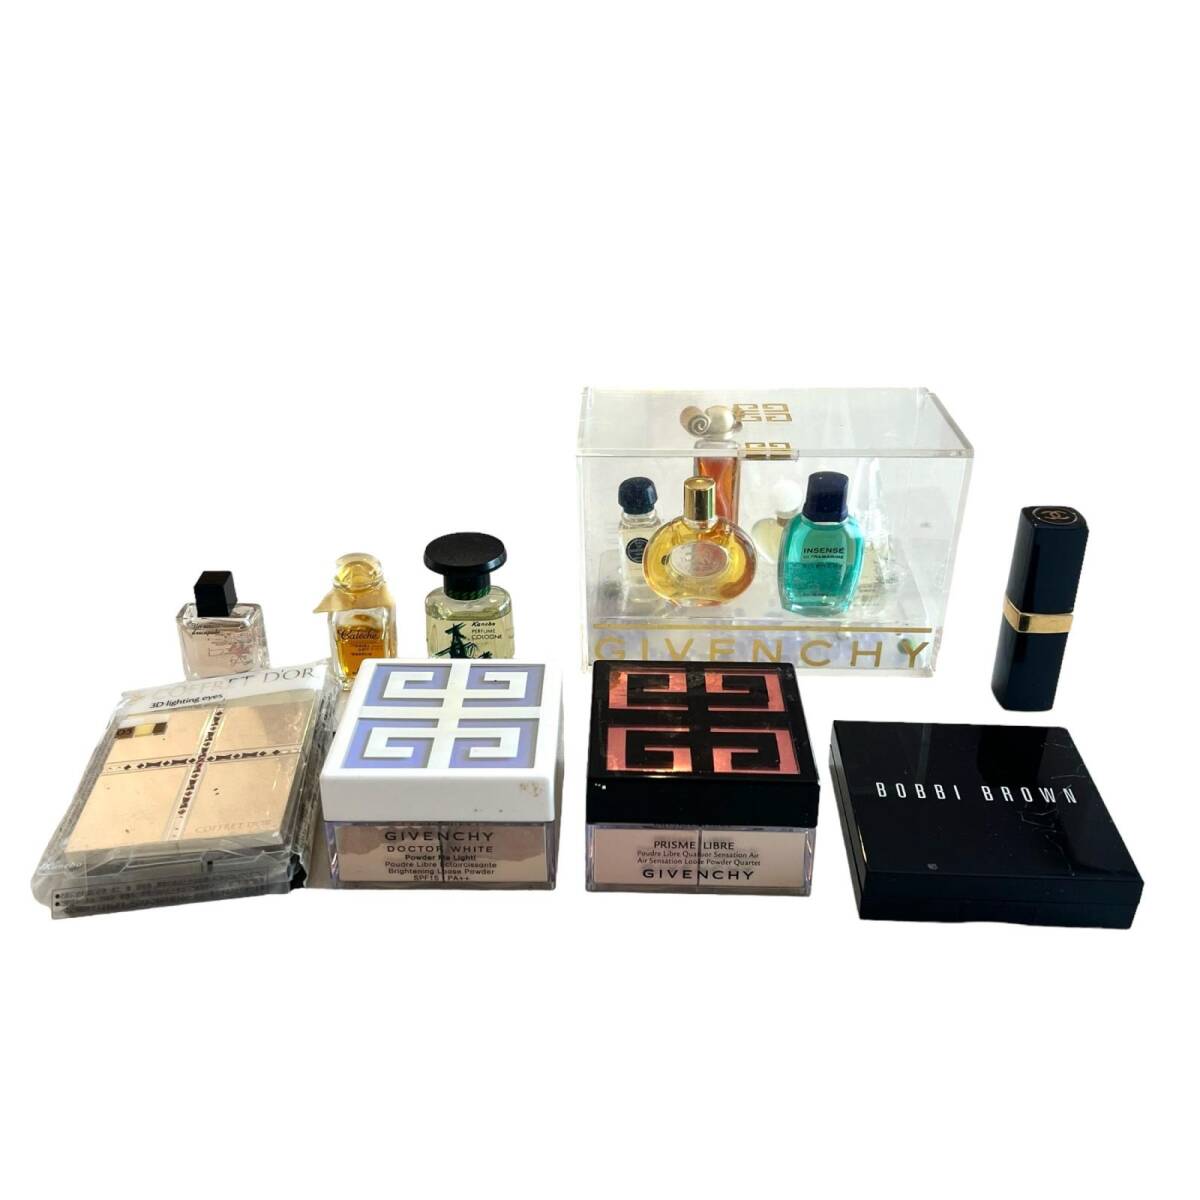 Givenchy Givenchy Chanel brand cosme set cosmetics 